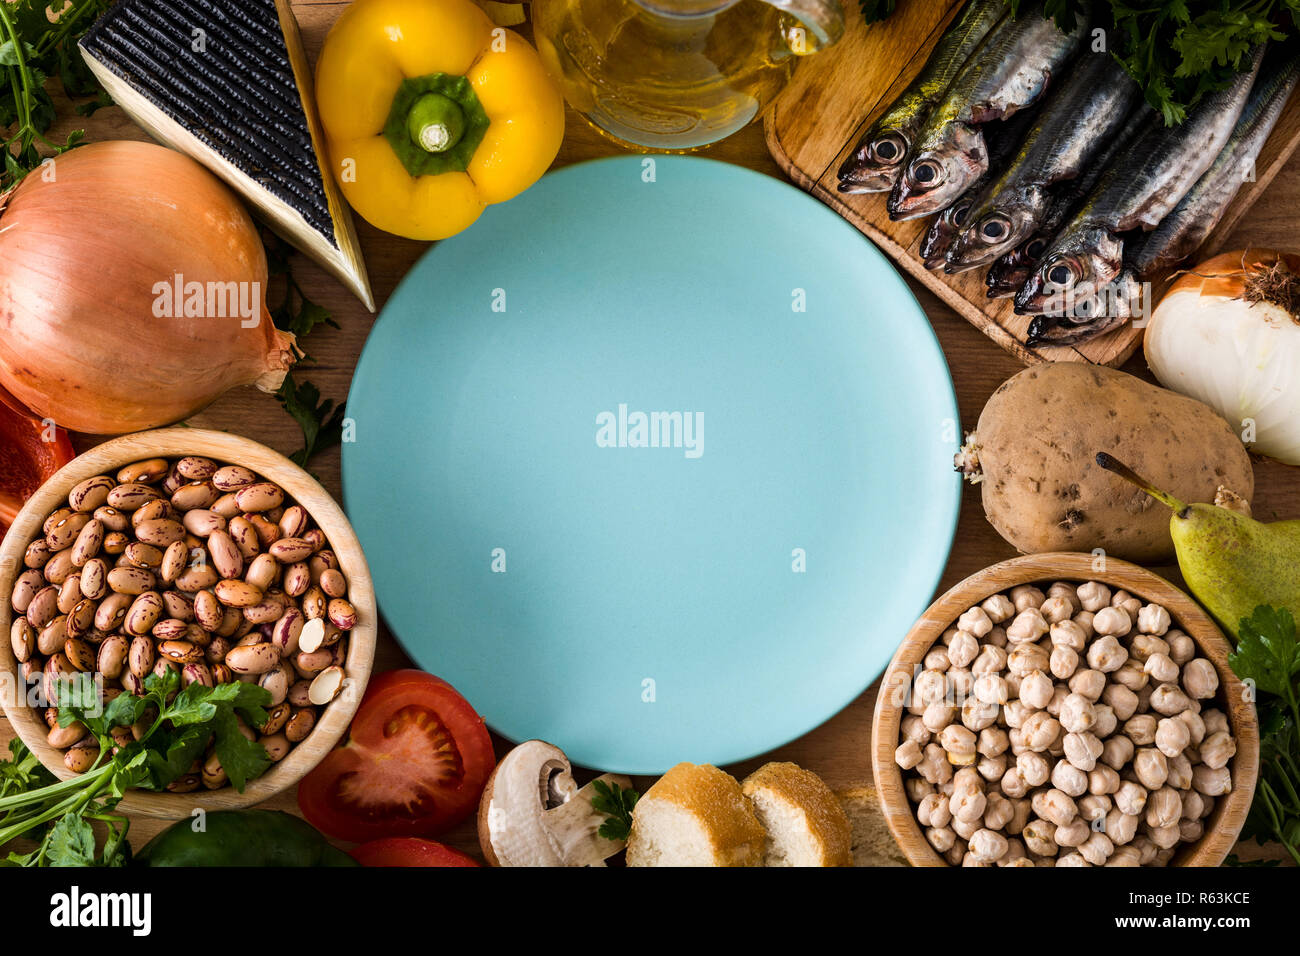 Healthy eating. Mediterranean diet. Fruit,vegetables, grain, nuts olive oil and fish on wooden table. Top view with copy space on plate Stock Photo